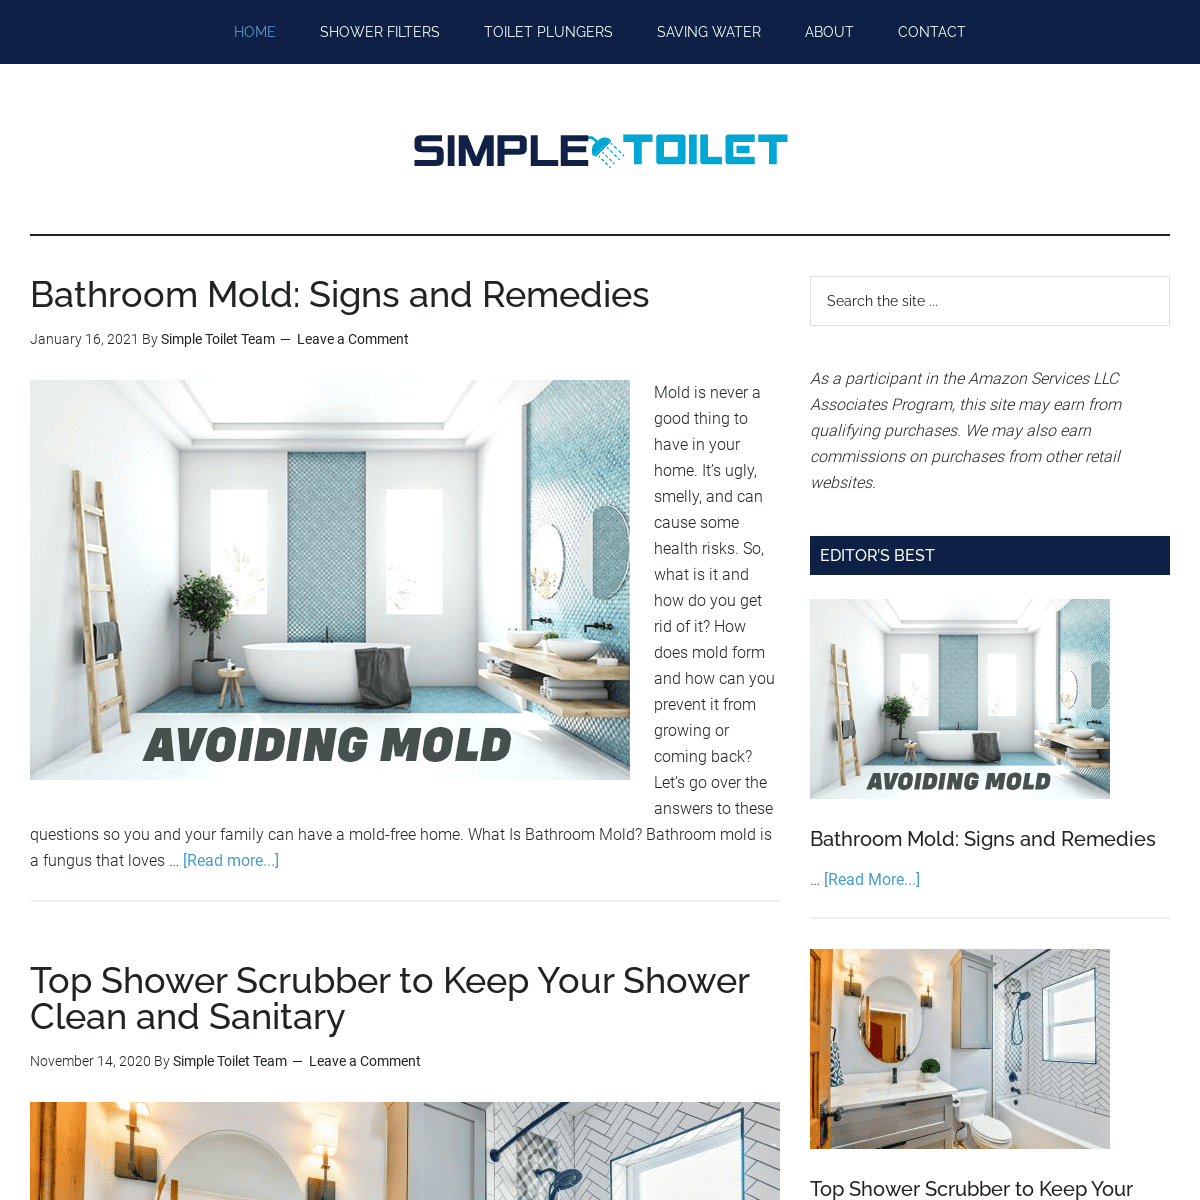 A complete backup of https://simpletoilet.com